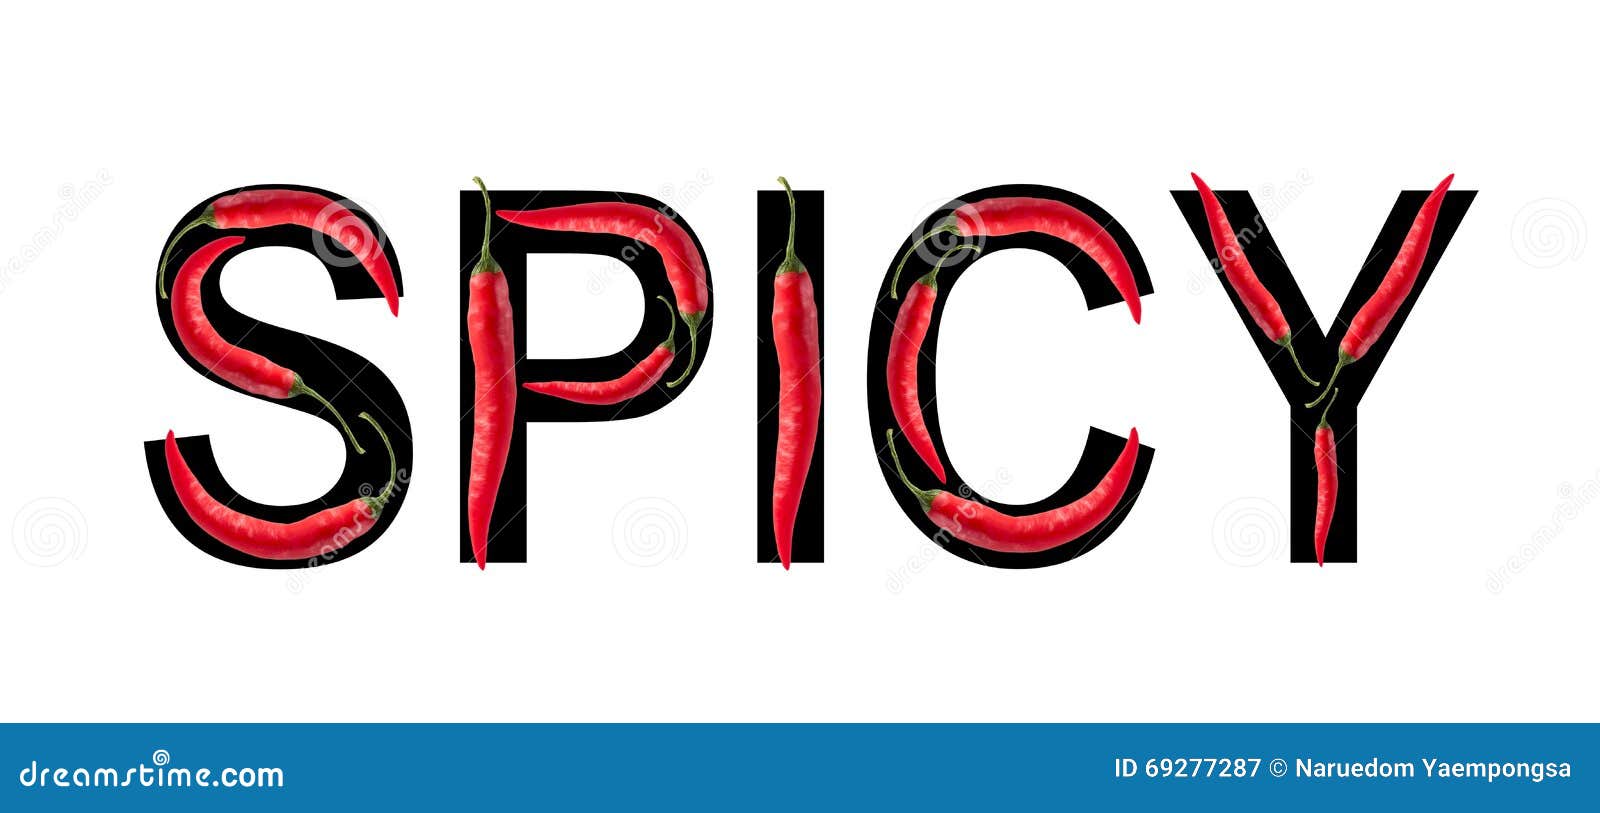 Spicy Word logo.